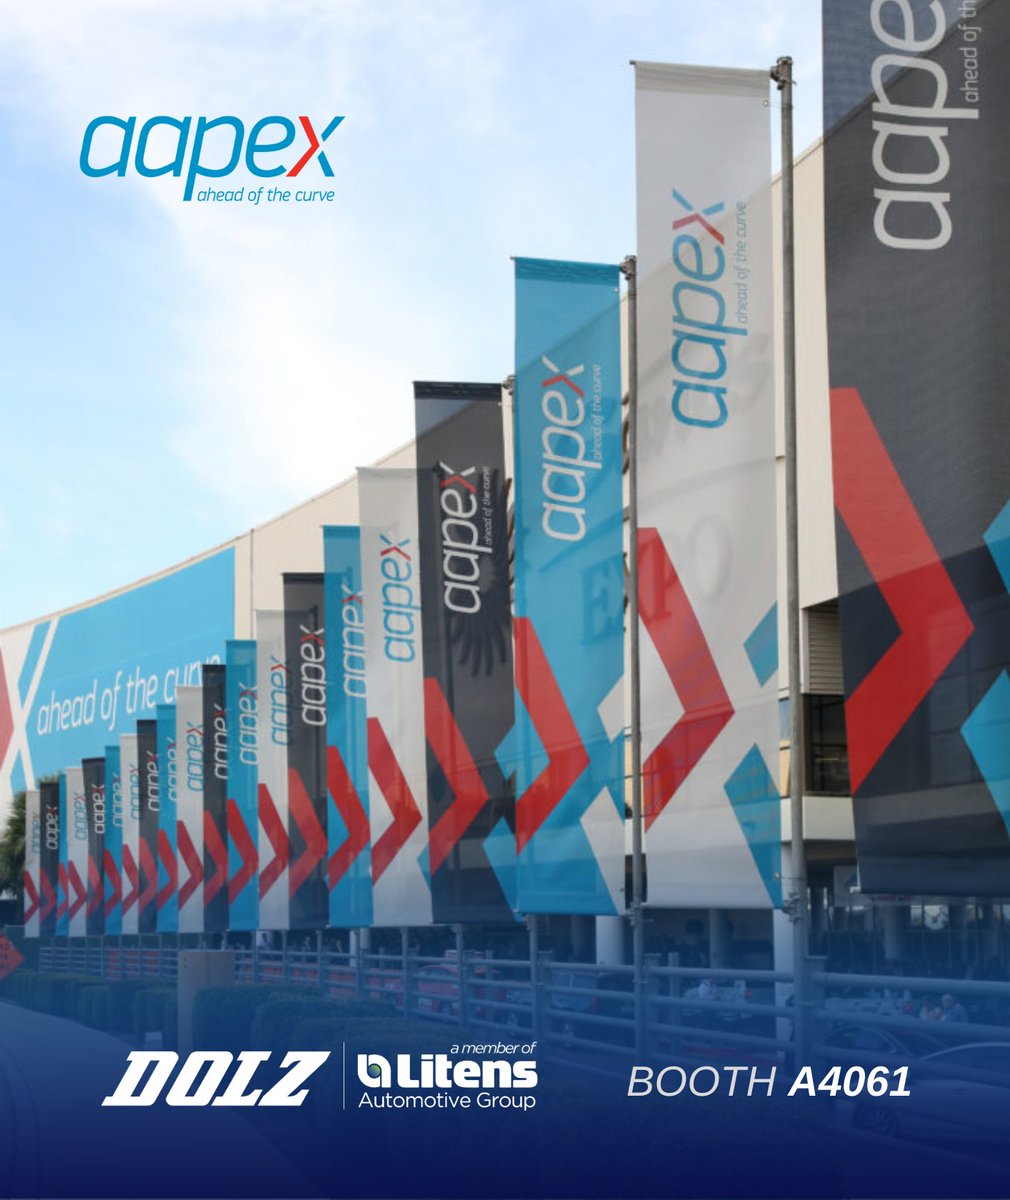 Vegas, here we come! ⌛️ -5 Days to go for @AAPEXShow 2023! 😉 See you soon at booth A4061 (Hall A). @LITENS_AG #DOLZ #Aftermarket #AAPEX23